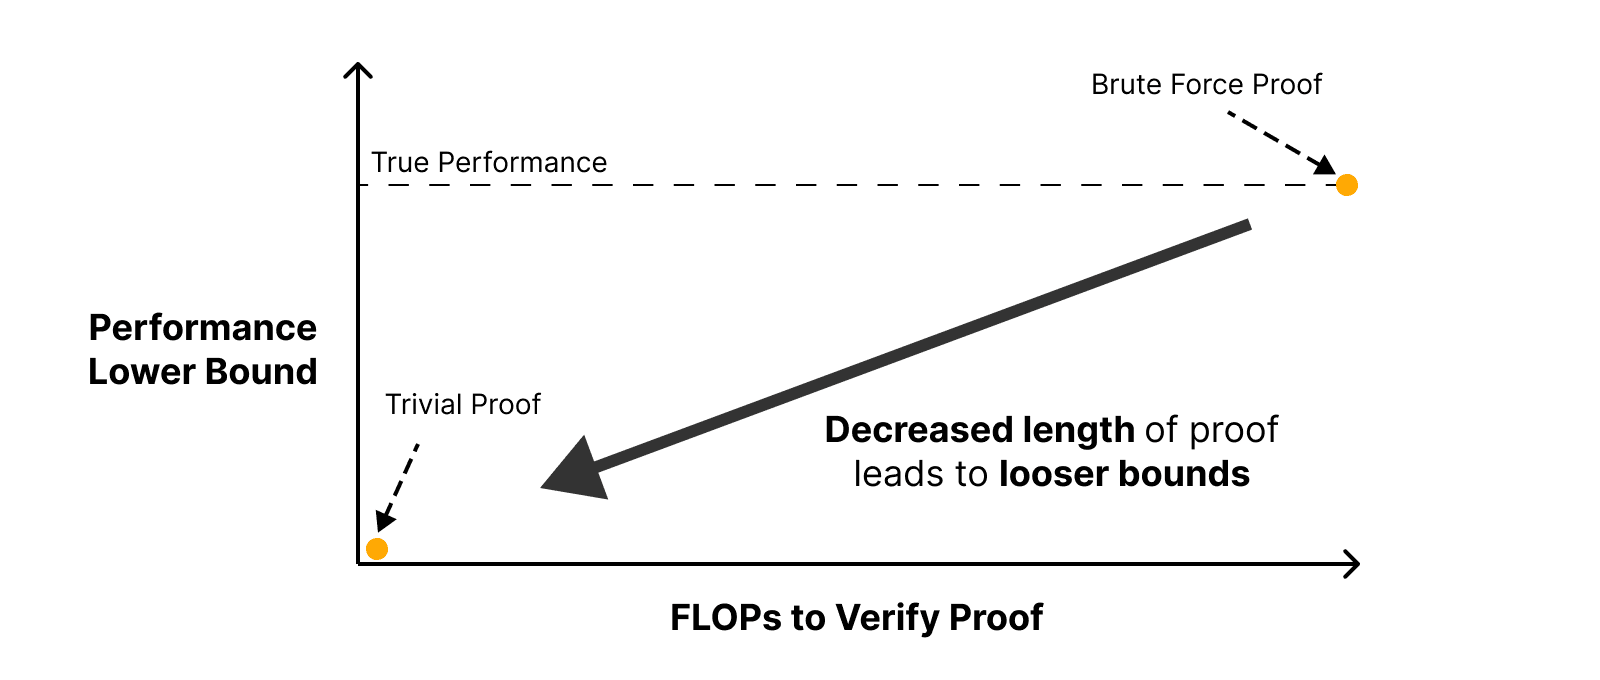 Performance Lower Bound vs. FLOPs to Verify Proof.  Brute force proof on the upper right, trivial proof on the lower left.  An arrow from upper right to lower left labeled decreased length of proof leads to looser bounds.